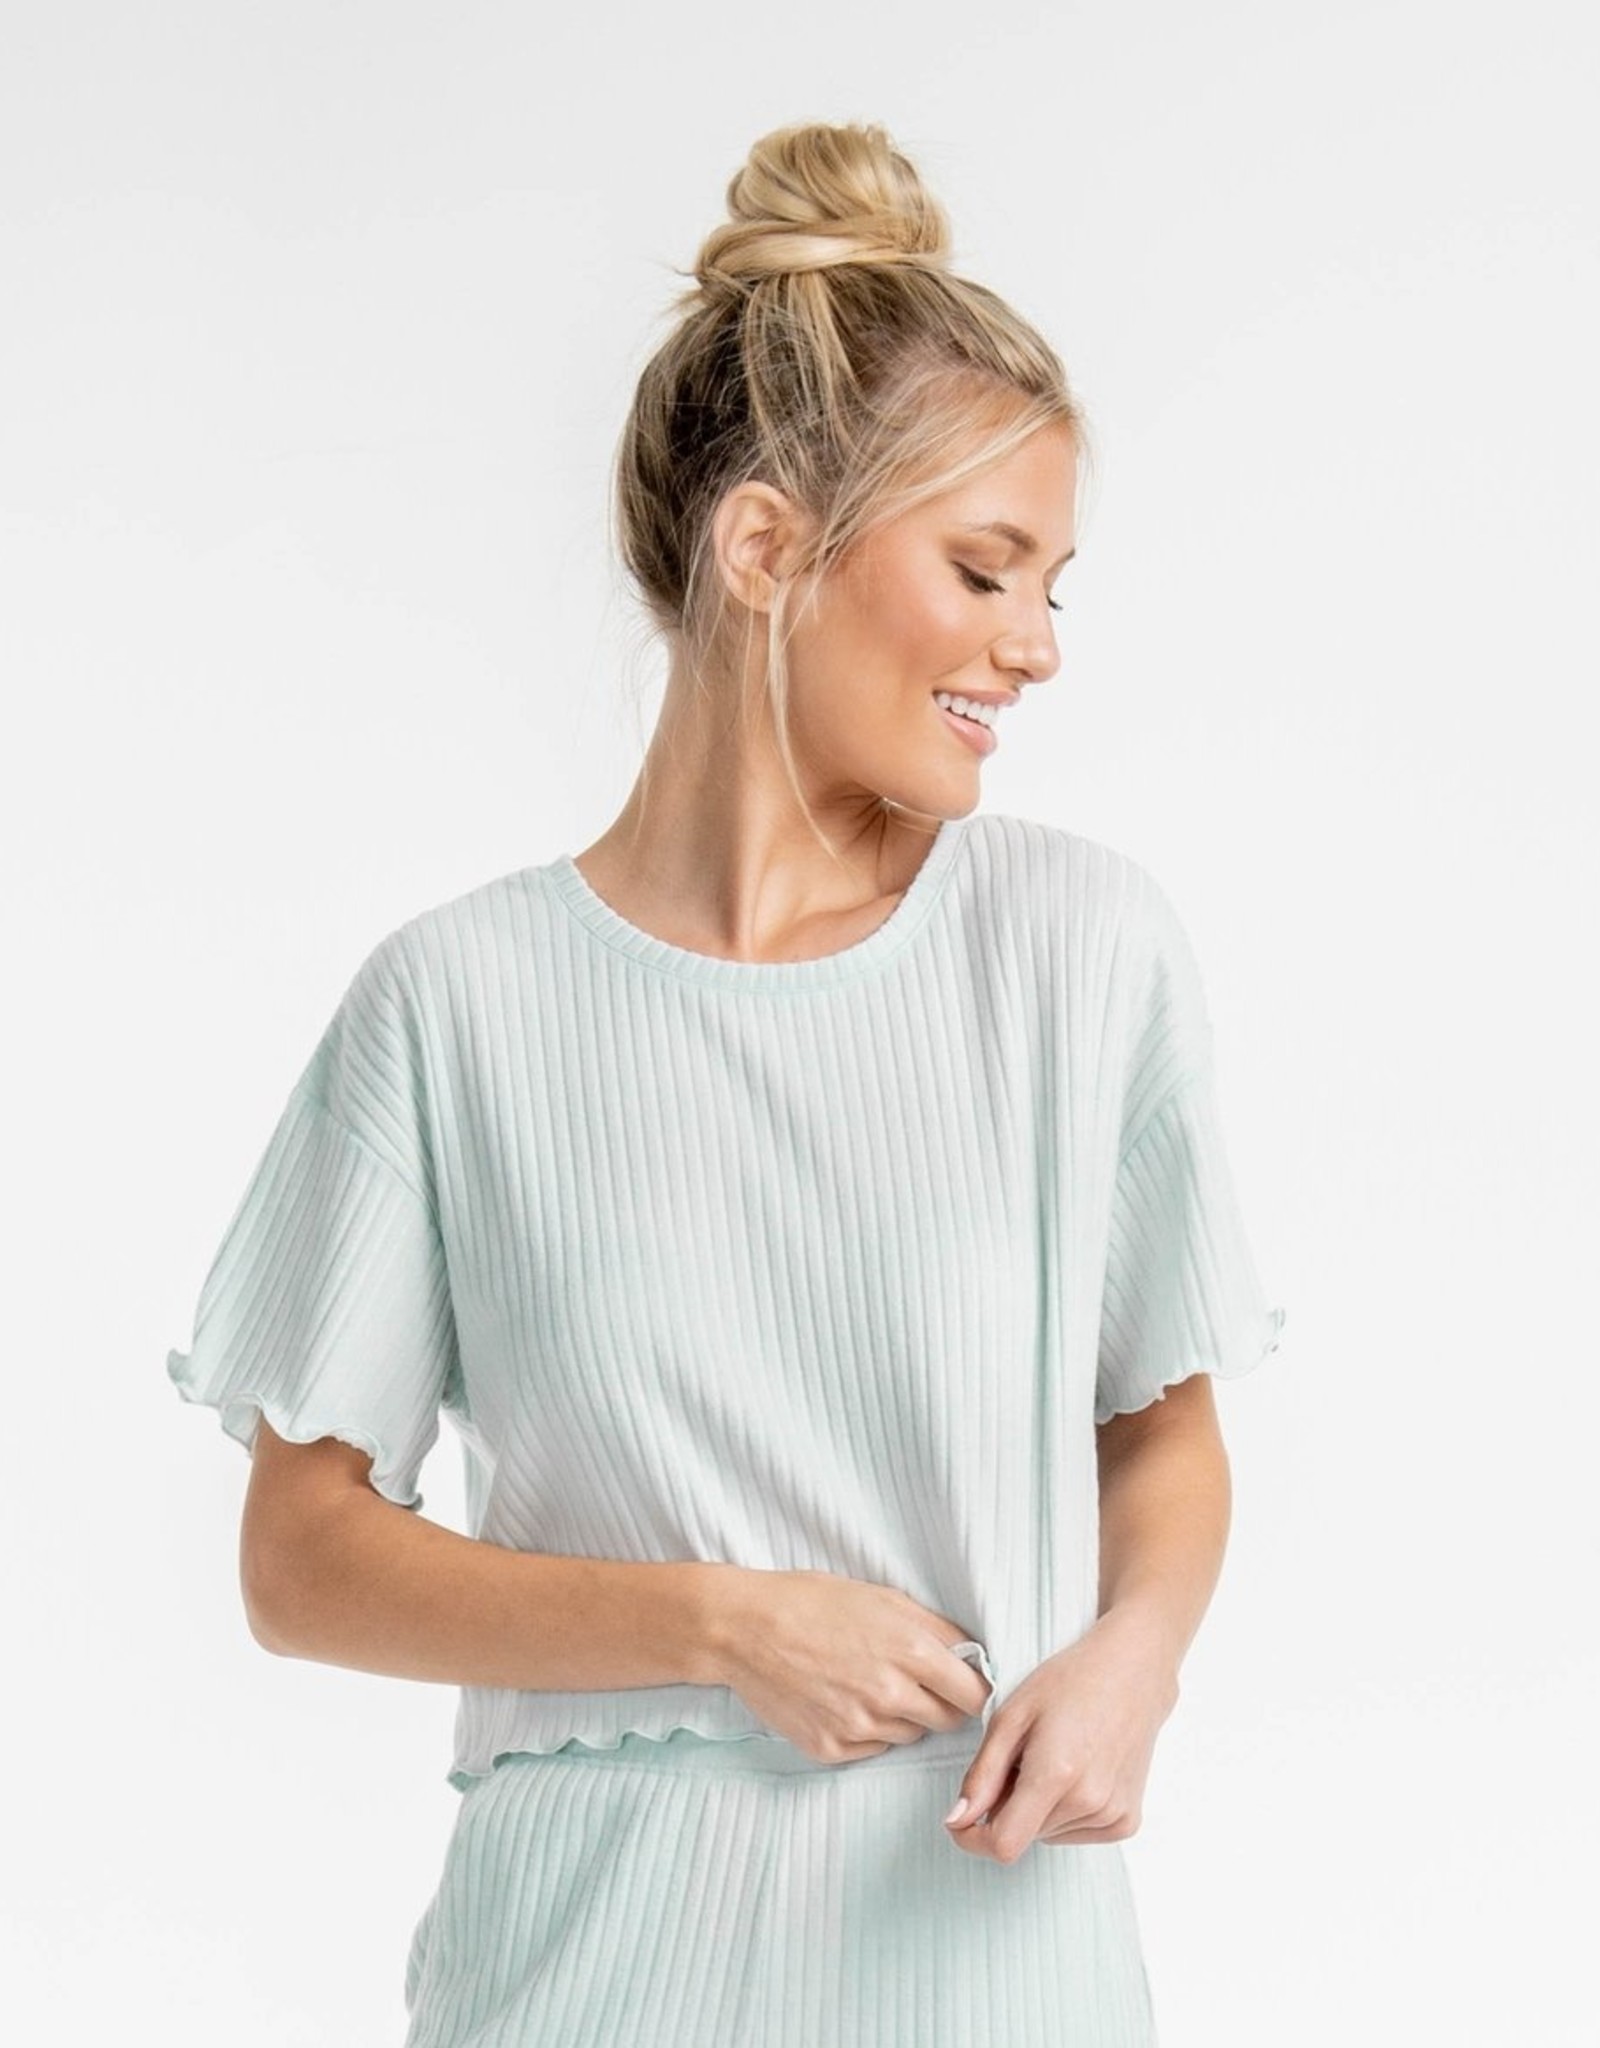 Southern Shirt Ribbed Sincerely Soft Lounge Top